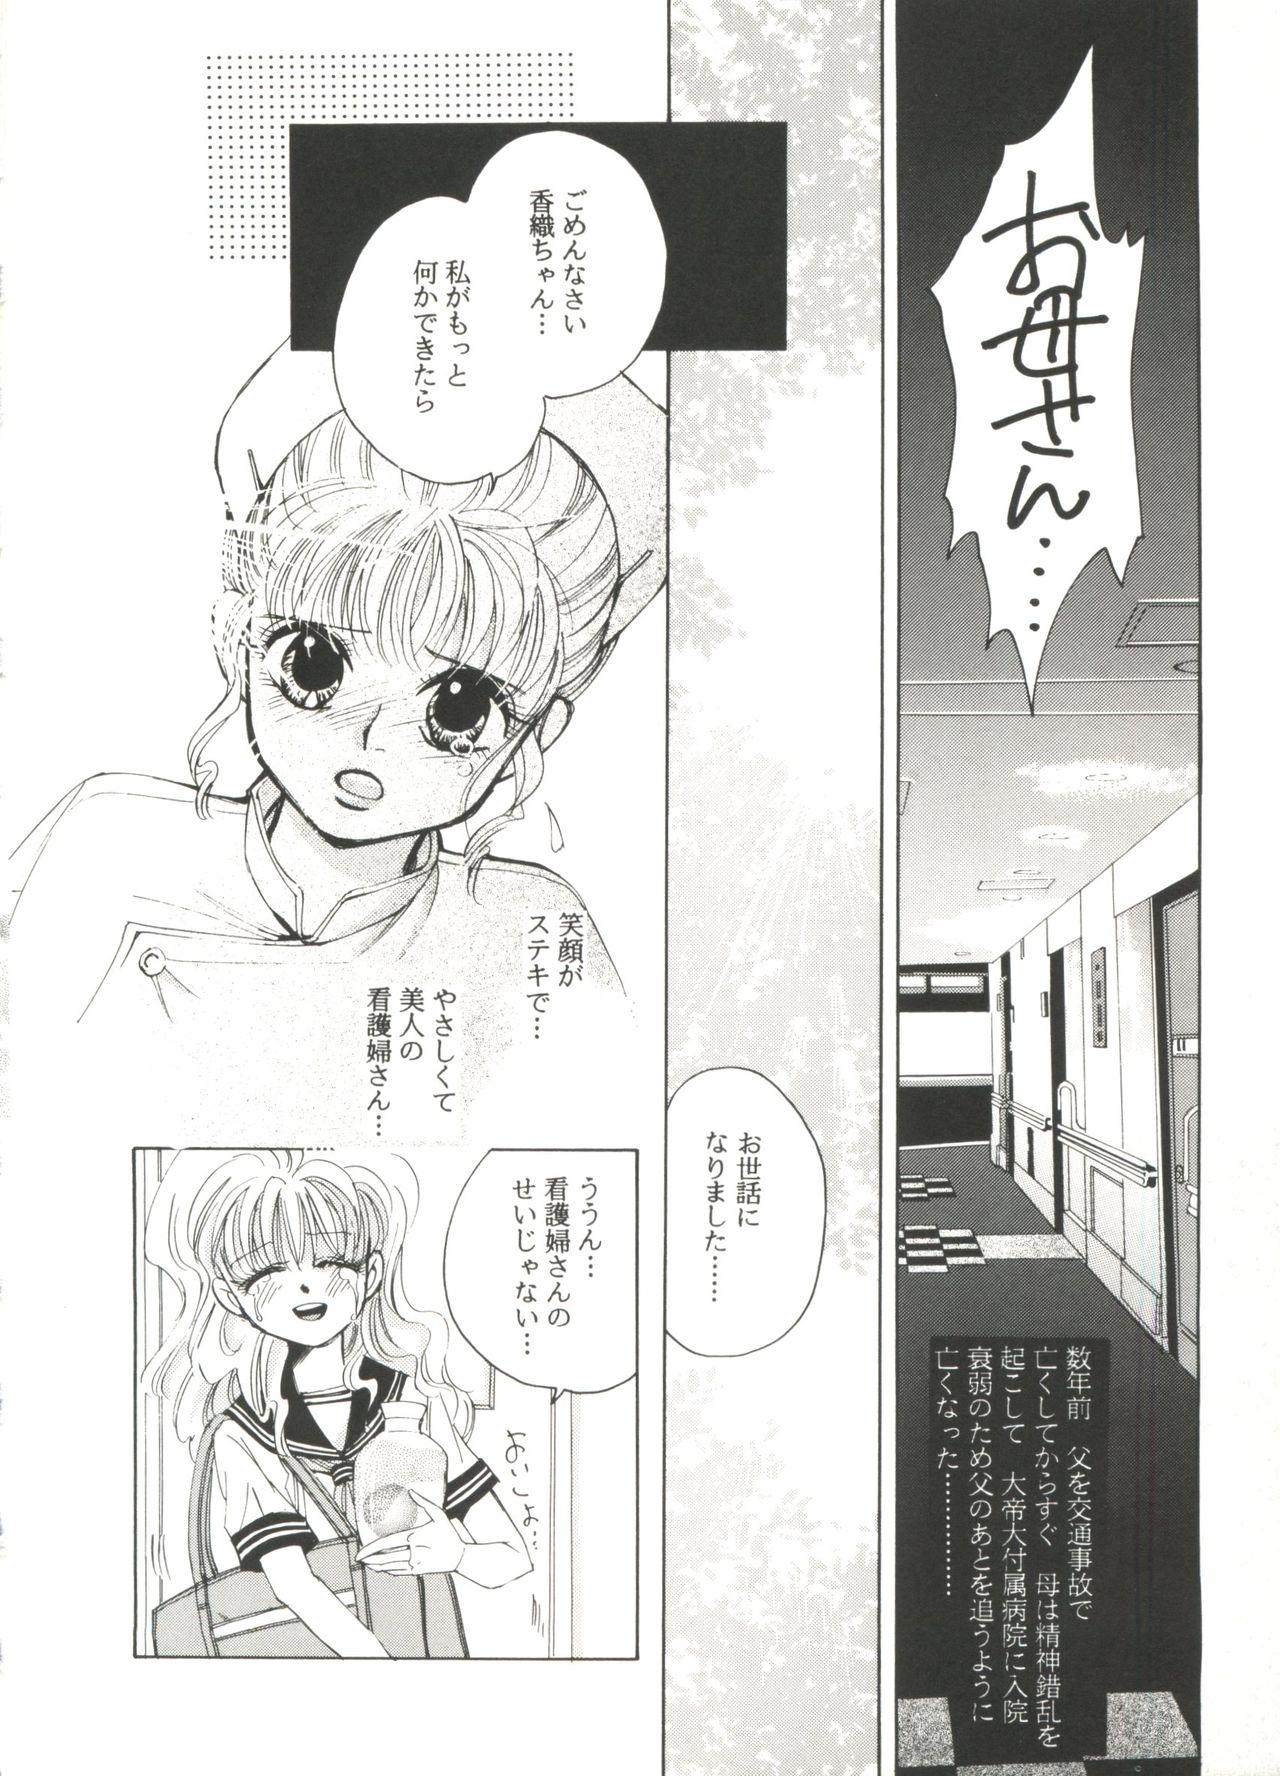 Gay Pawnshop Doujin Anthology Bishoujo a La Carte 8 - Sailor moon King of fighters Magic knight rayearth Battle athletes Saber marionette Kodomo no omocha Passion - Page 8